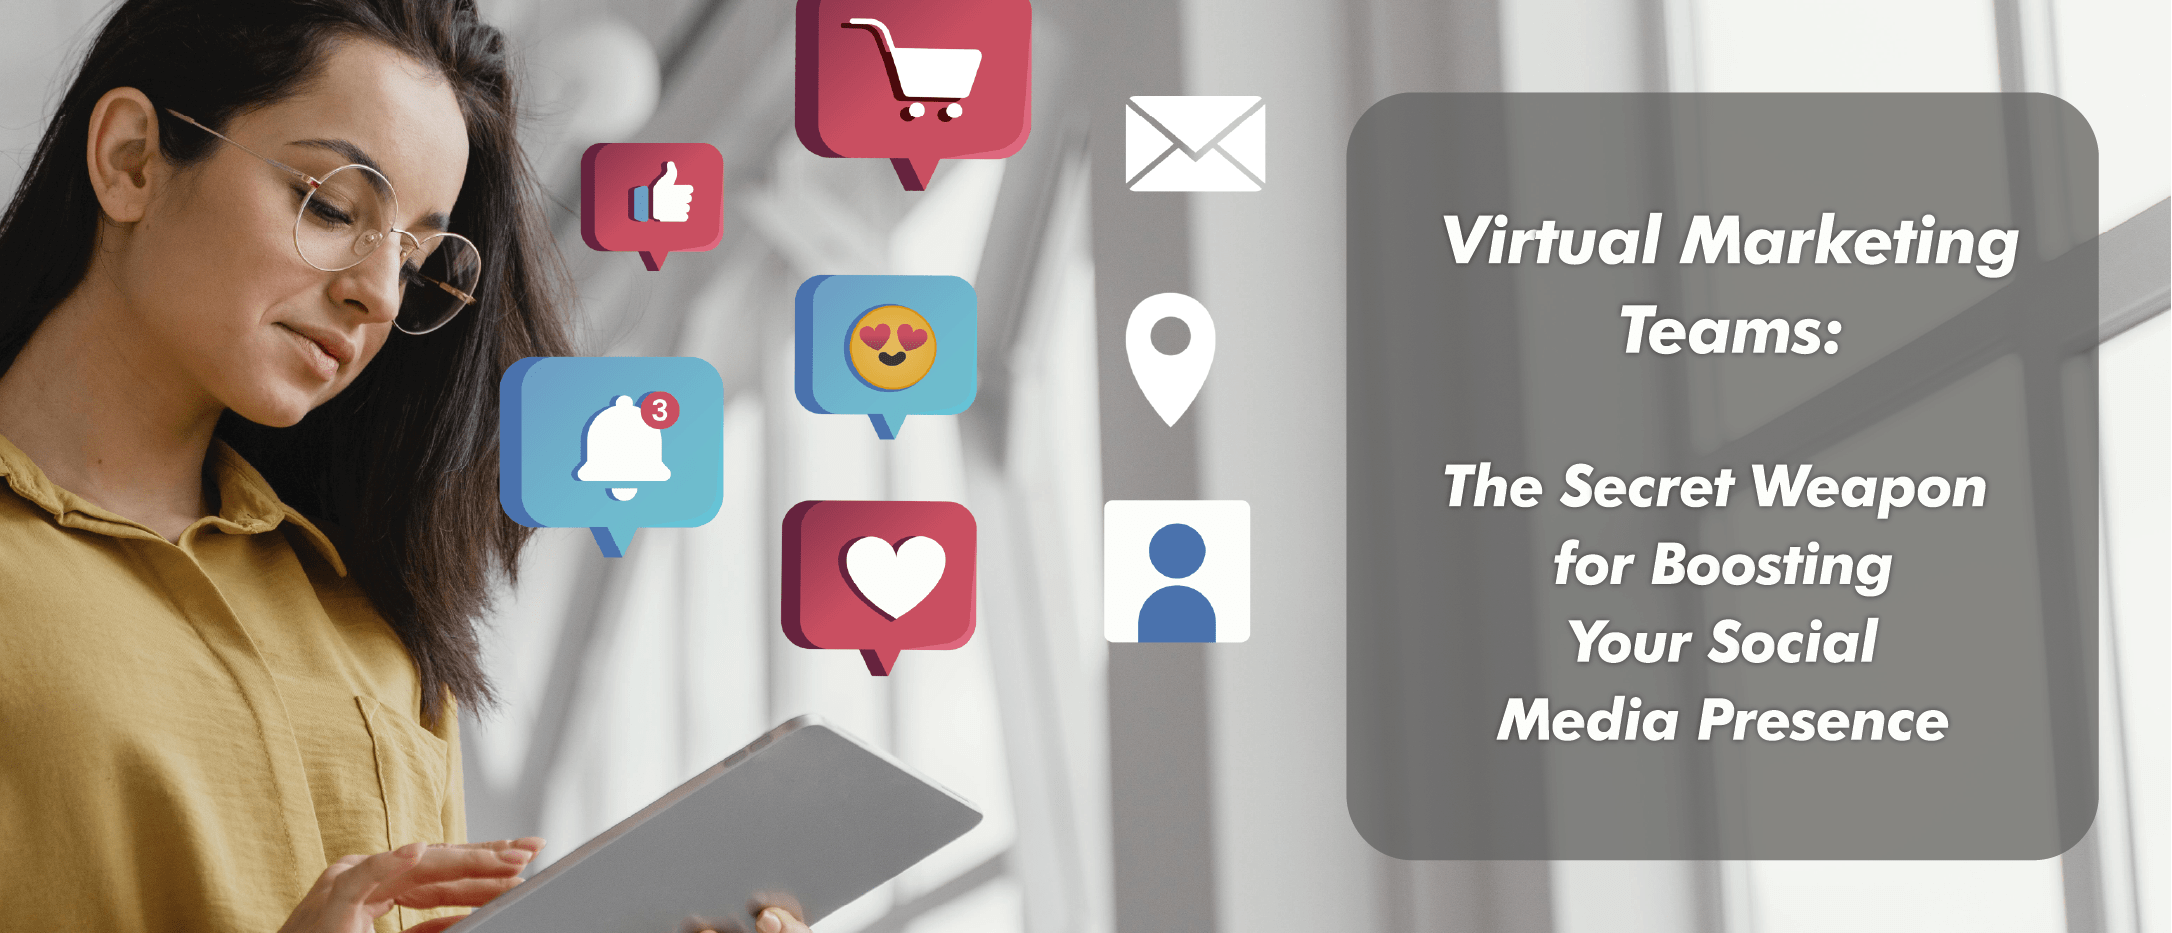 Virtual Marketing Teams: The Secret Weapon for Boosting Your Social Media Presence